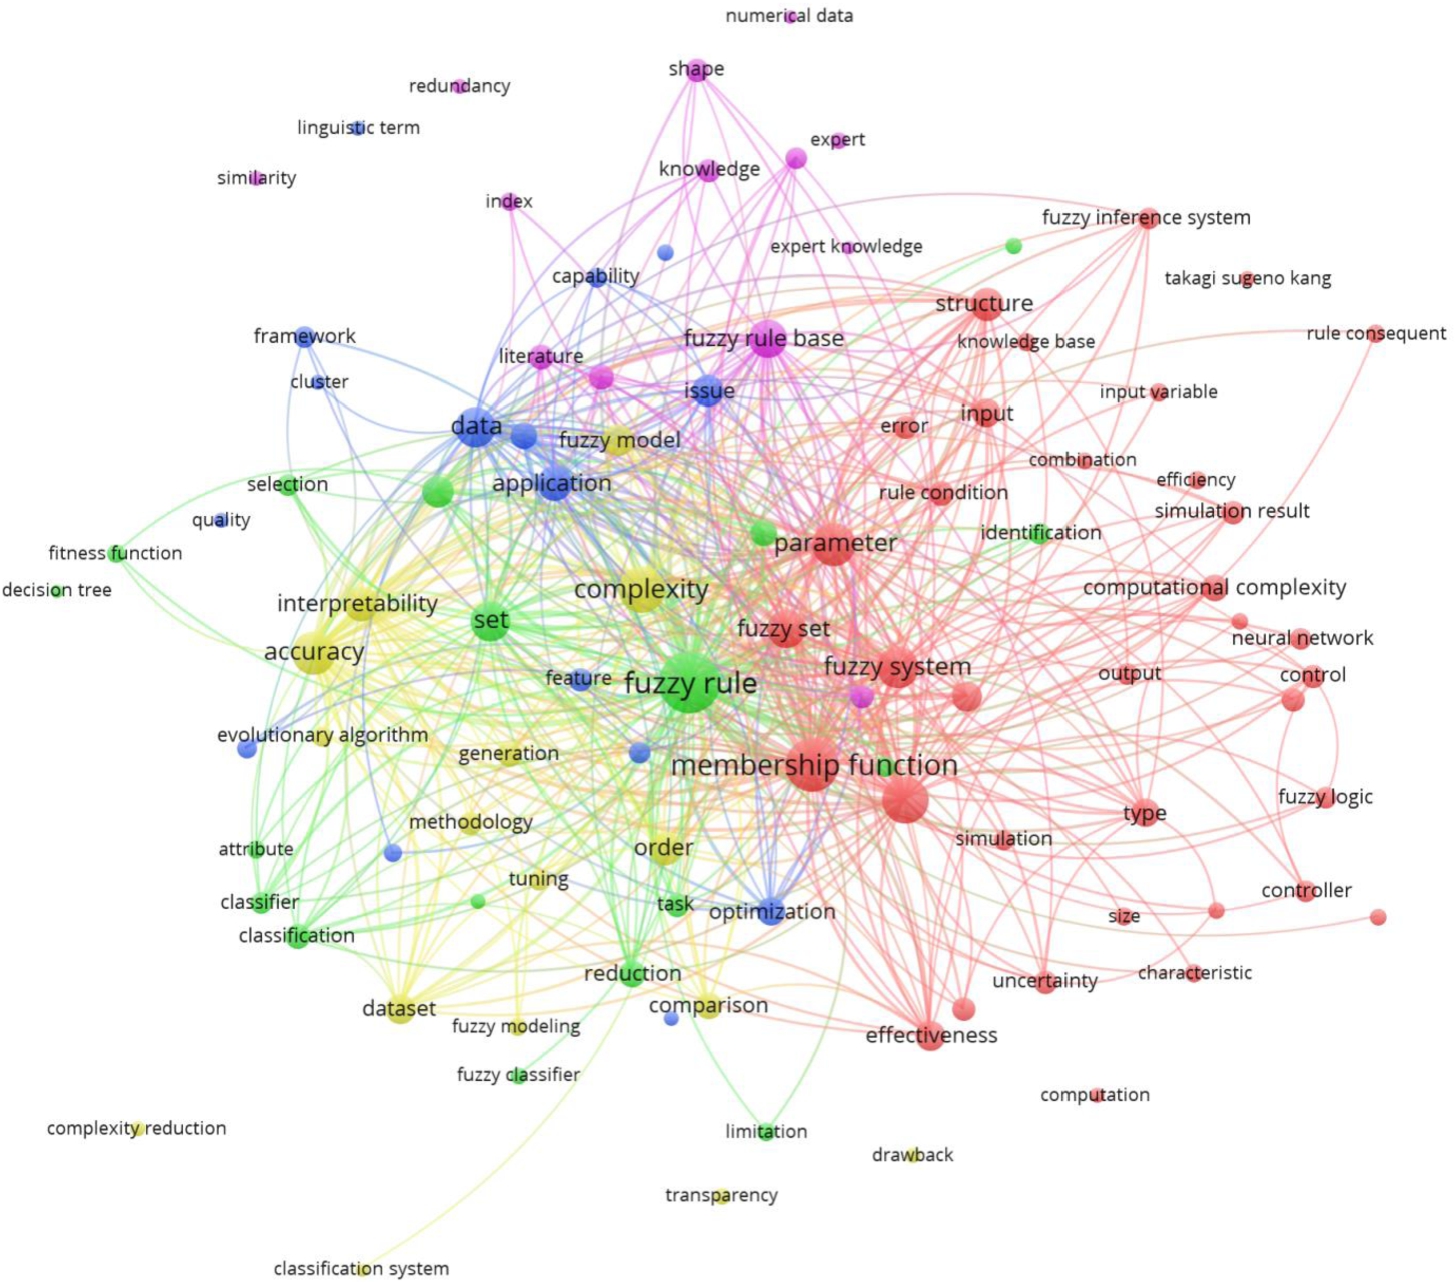 Co-occurrence network of keywords on the topic of complexity issues.